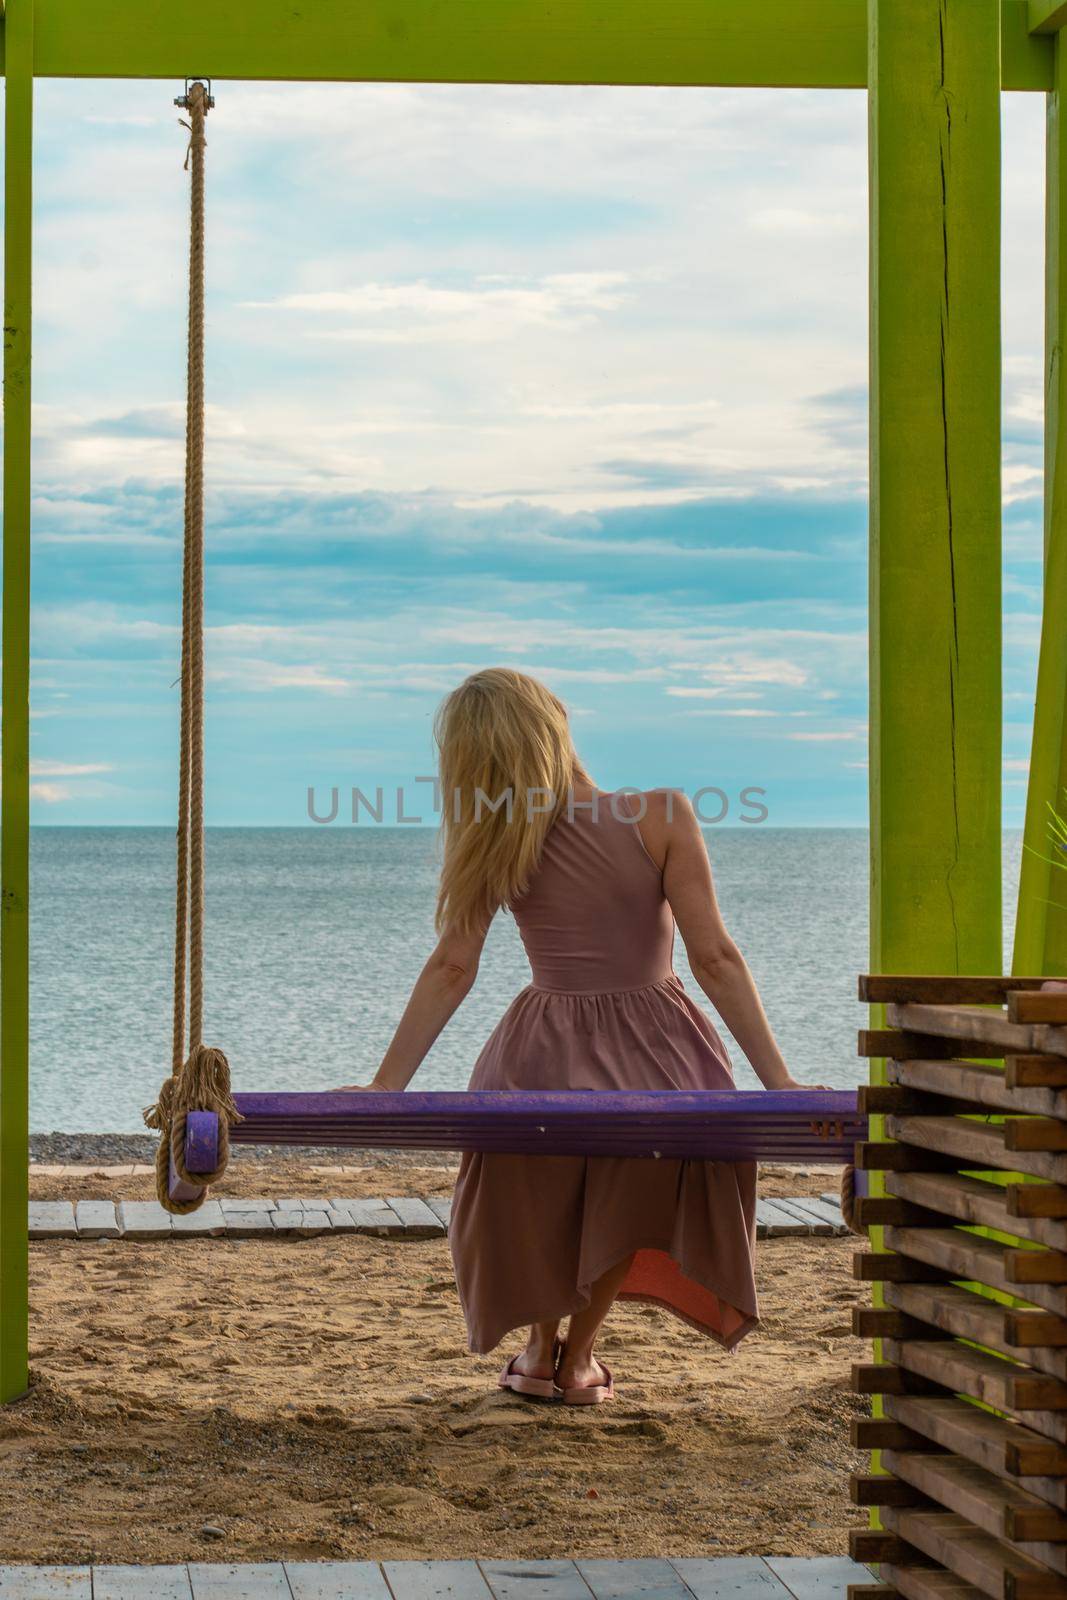 Swing beach sea happy summer travel woman leisure thailand asia, for traveler krabi in tropical and relaxation paradise, blue peaceful. Joy sunset landscape,